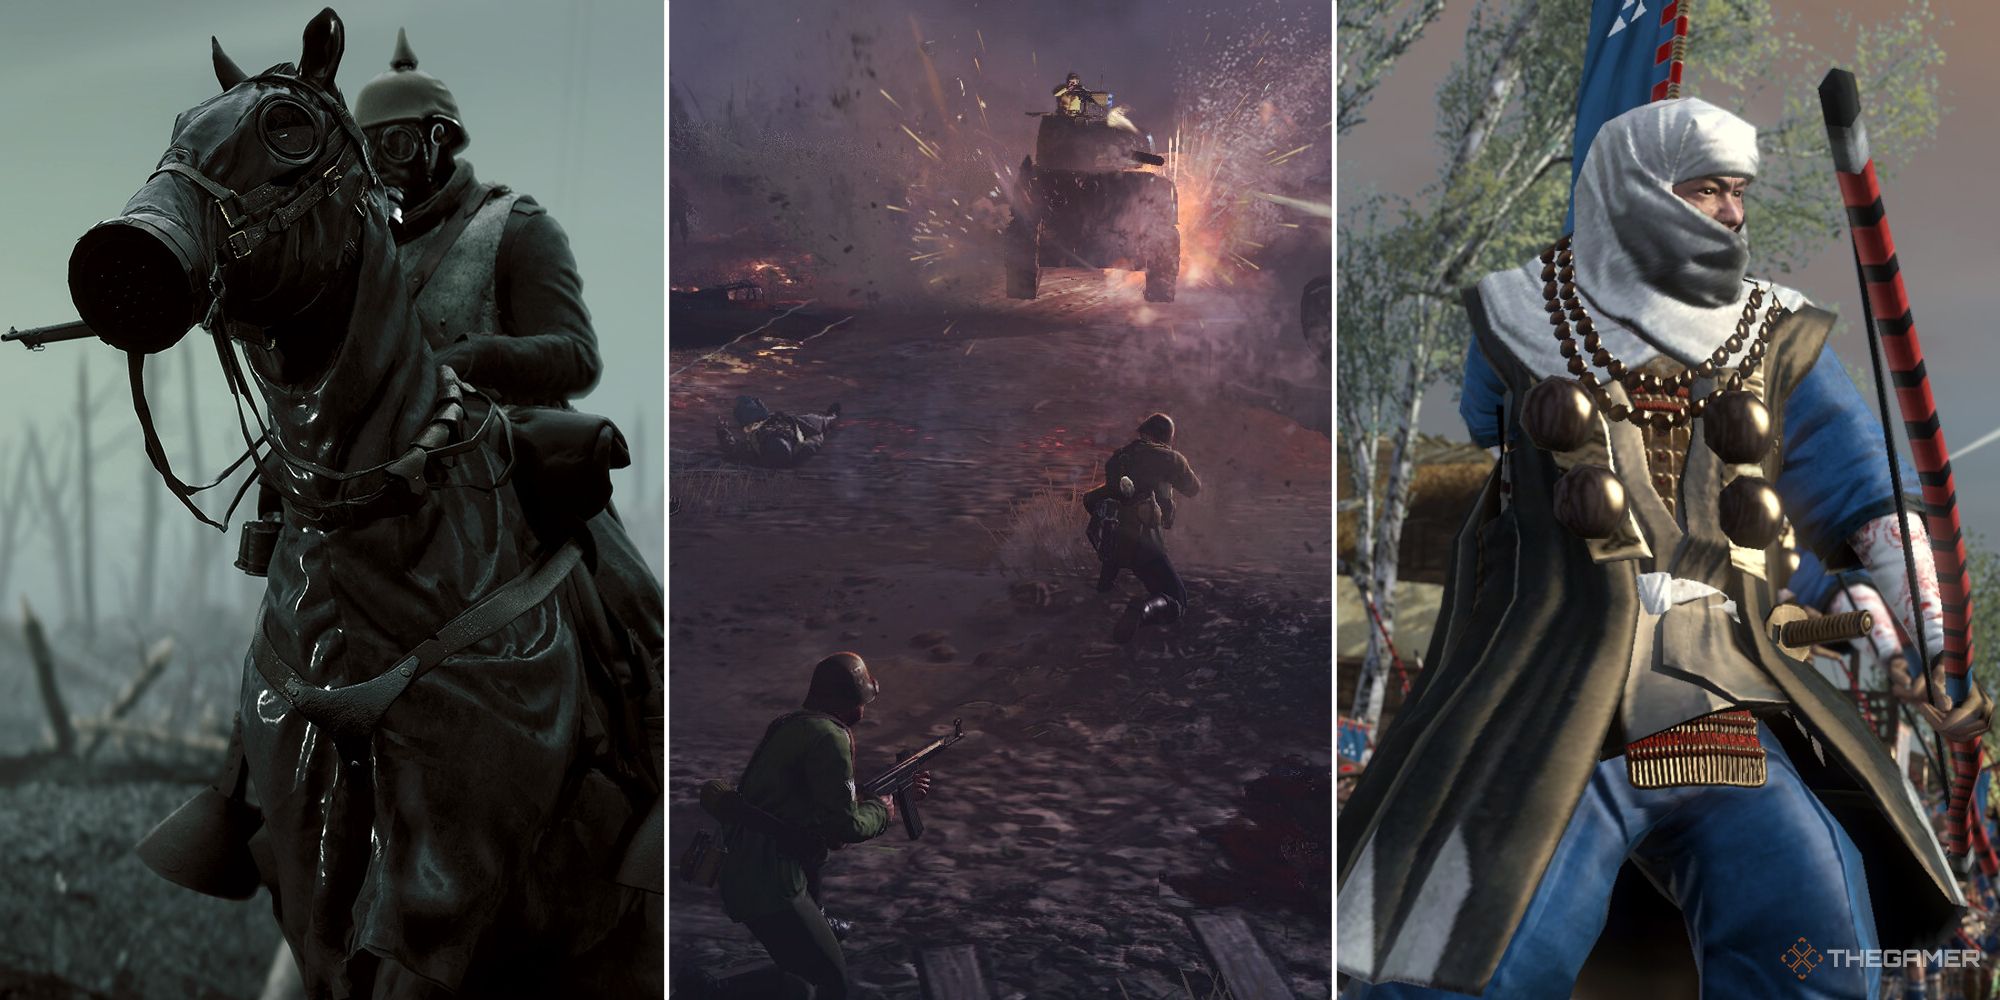 a mounted storm trooper in Battlefield 1, a combat scene from Company of Heroes 3, and a masked archer of the Hojo Clan in Total War: Shogun 2